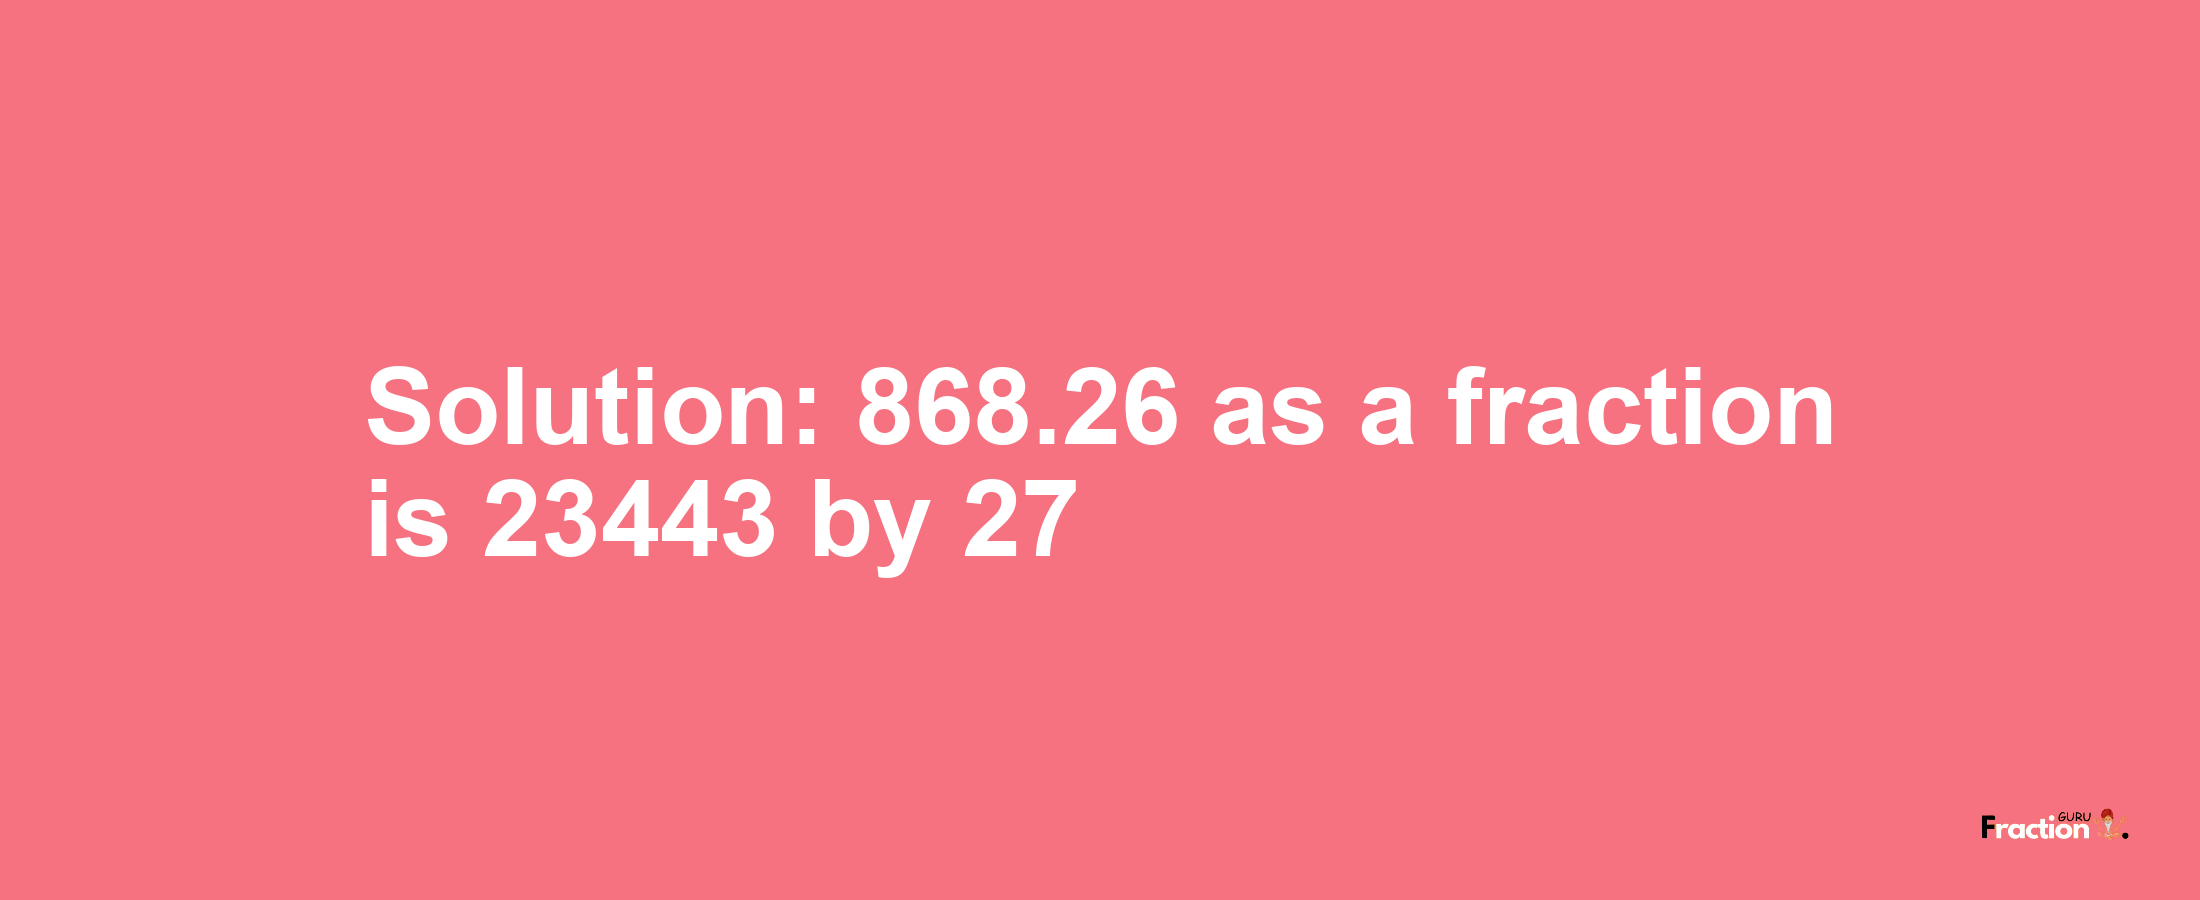 Solution:868.26 as a fraction is 23443/27